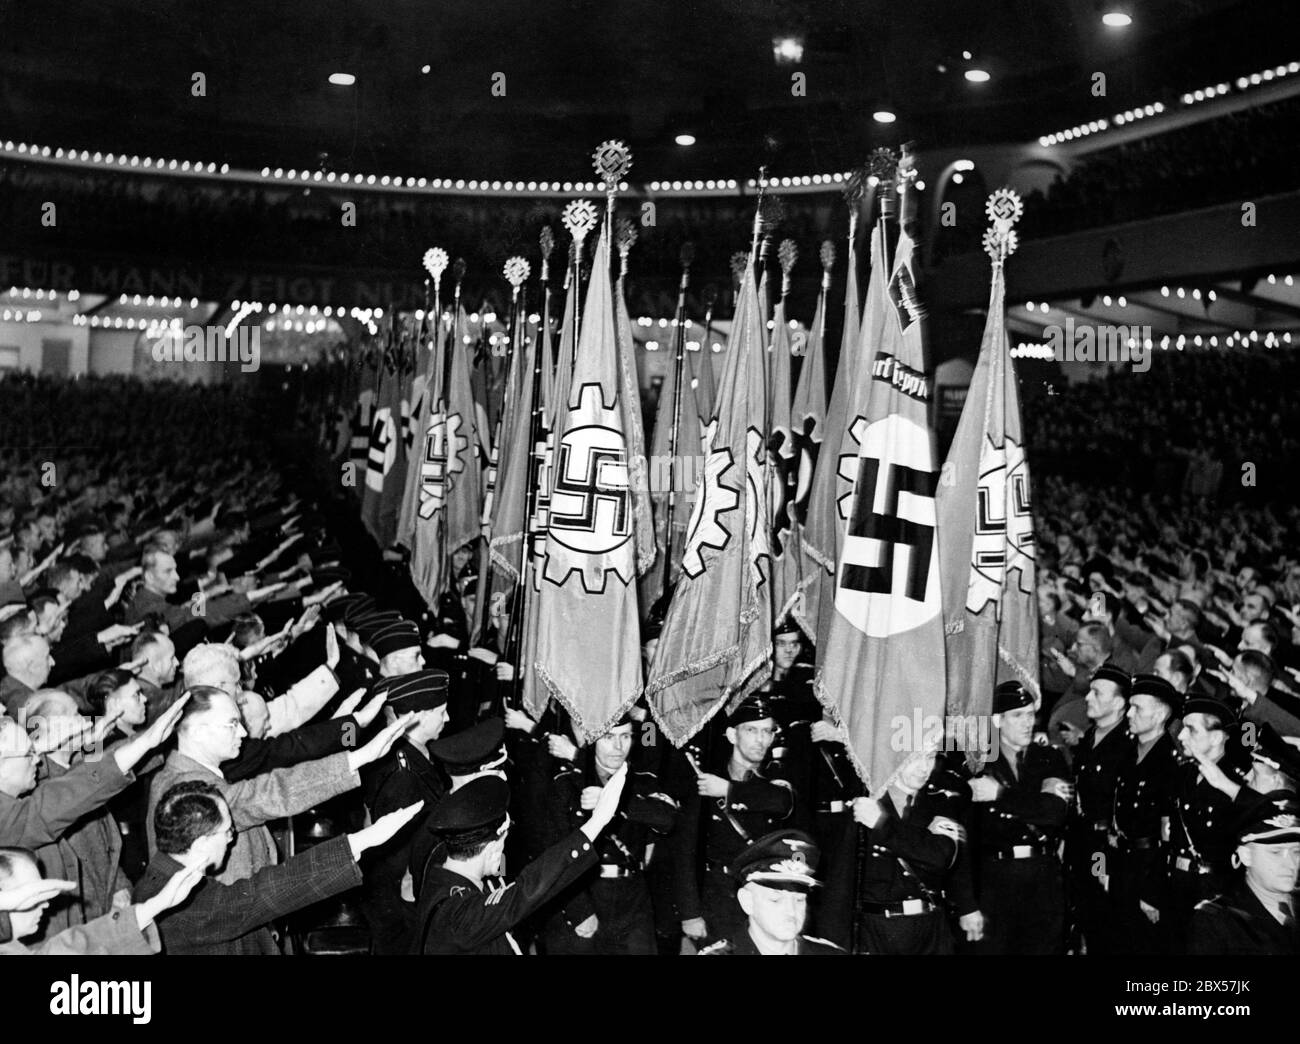 Parade of the flag bearers during a company roll call of the German Labor Front (DAF) at the Sportpalast Berlin. Shown are swastika flags, with DAF logo as well as special model plant flags that were lost by the DAF. By means of roll calls and flag marches, the German Labor Front (DAF) tries to invoke the loyalty and perseverance of the salaried workers during National Socialism. Stock Photo